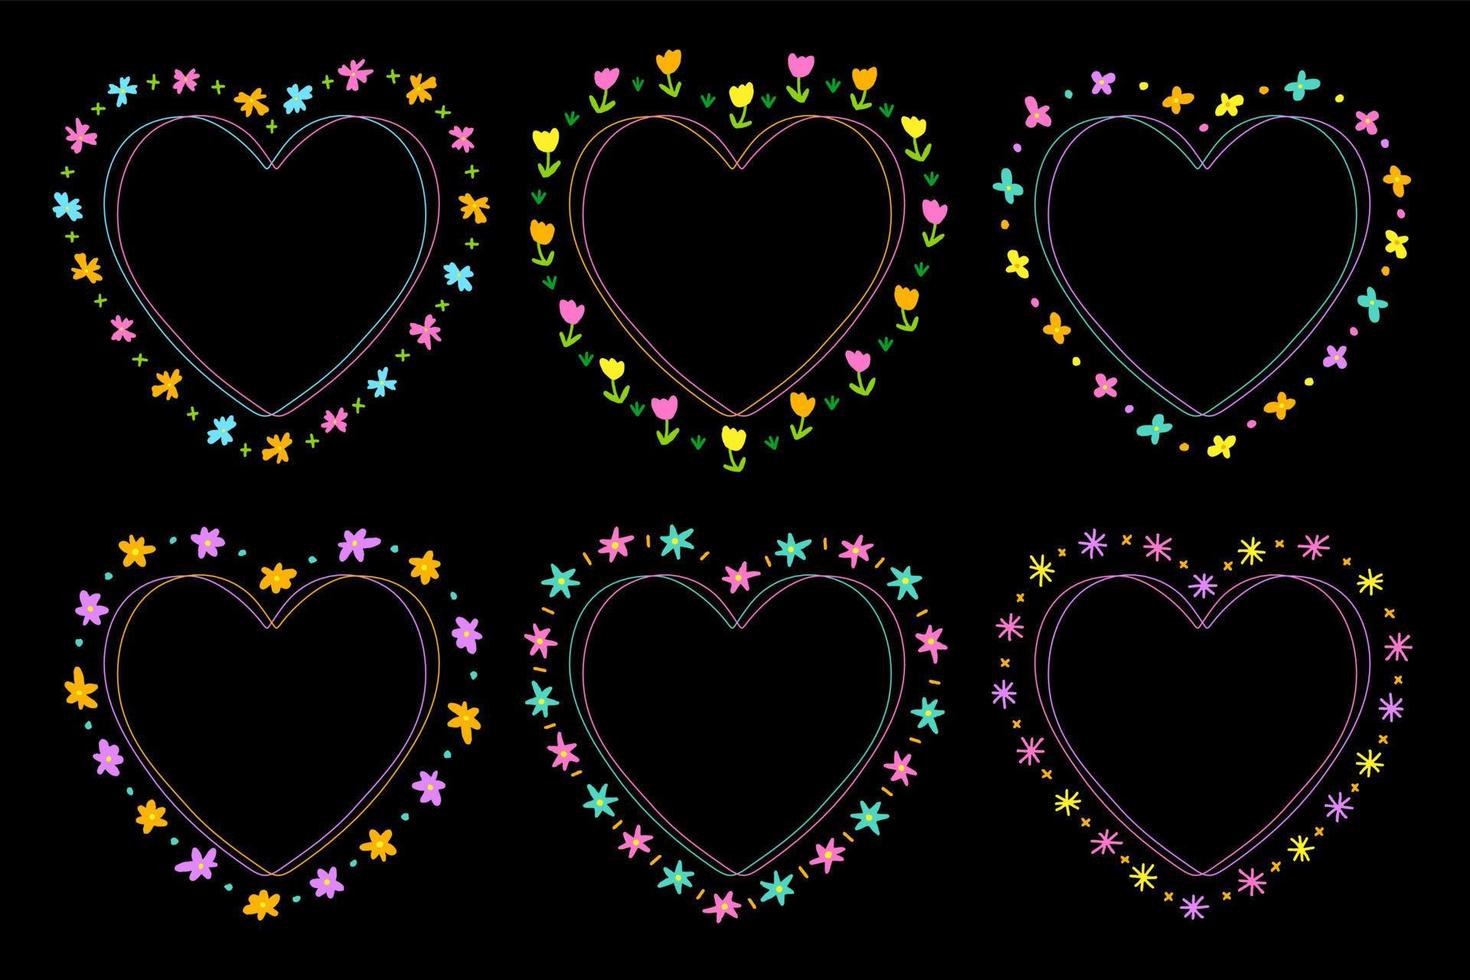 Cute Neon Abstract Heart Flower Shape Valentines Day Doodle Free Hand Drawing Drawn Line Borders Frames Wreath Plate Set Collection Flat Style Rainbow Colorful Black Background Vector Illustration